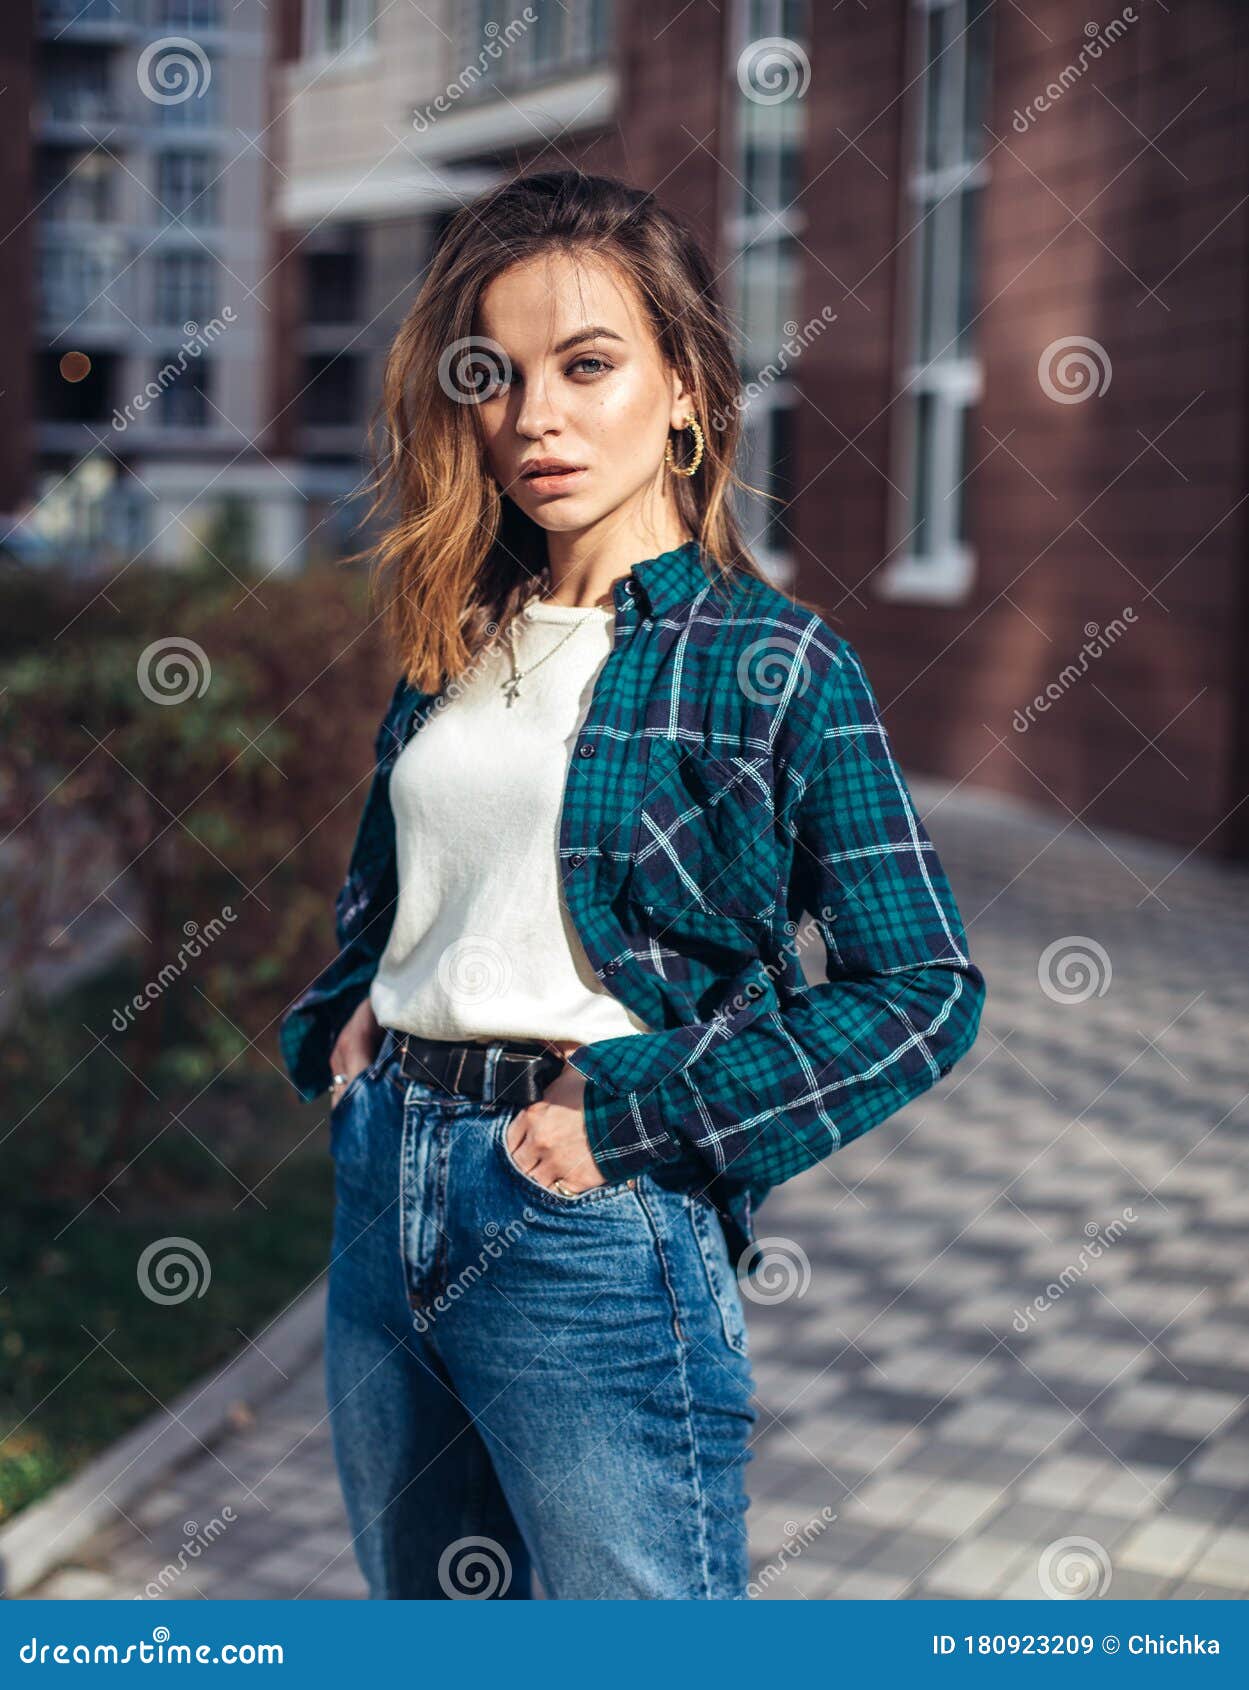 Fashion Hipster Woman Posing Outdoor. Plaid Shirt, Fashionable High-waisted  Jeans,brunette Hair Stock Image - Image of hair, hipster: 180923209